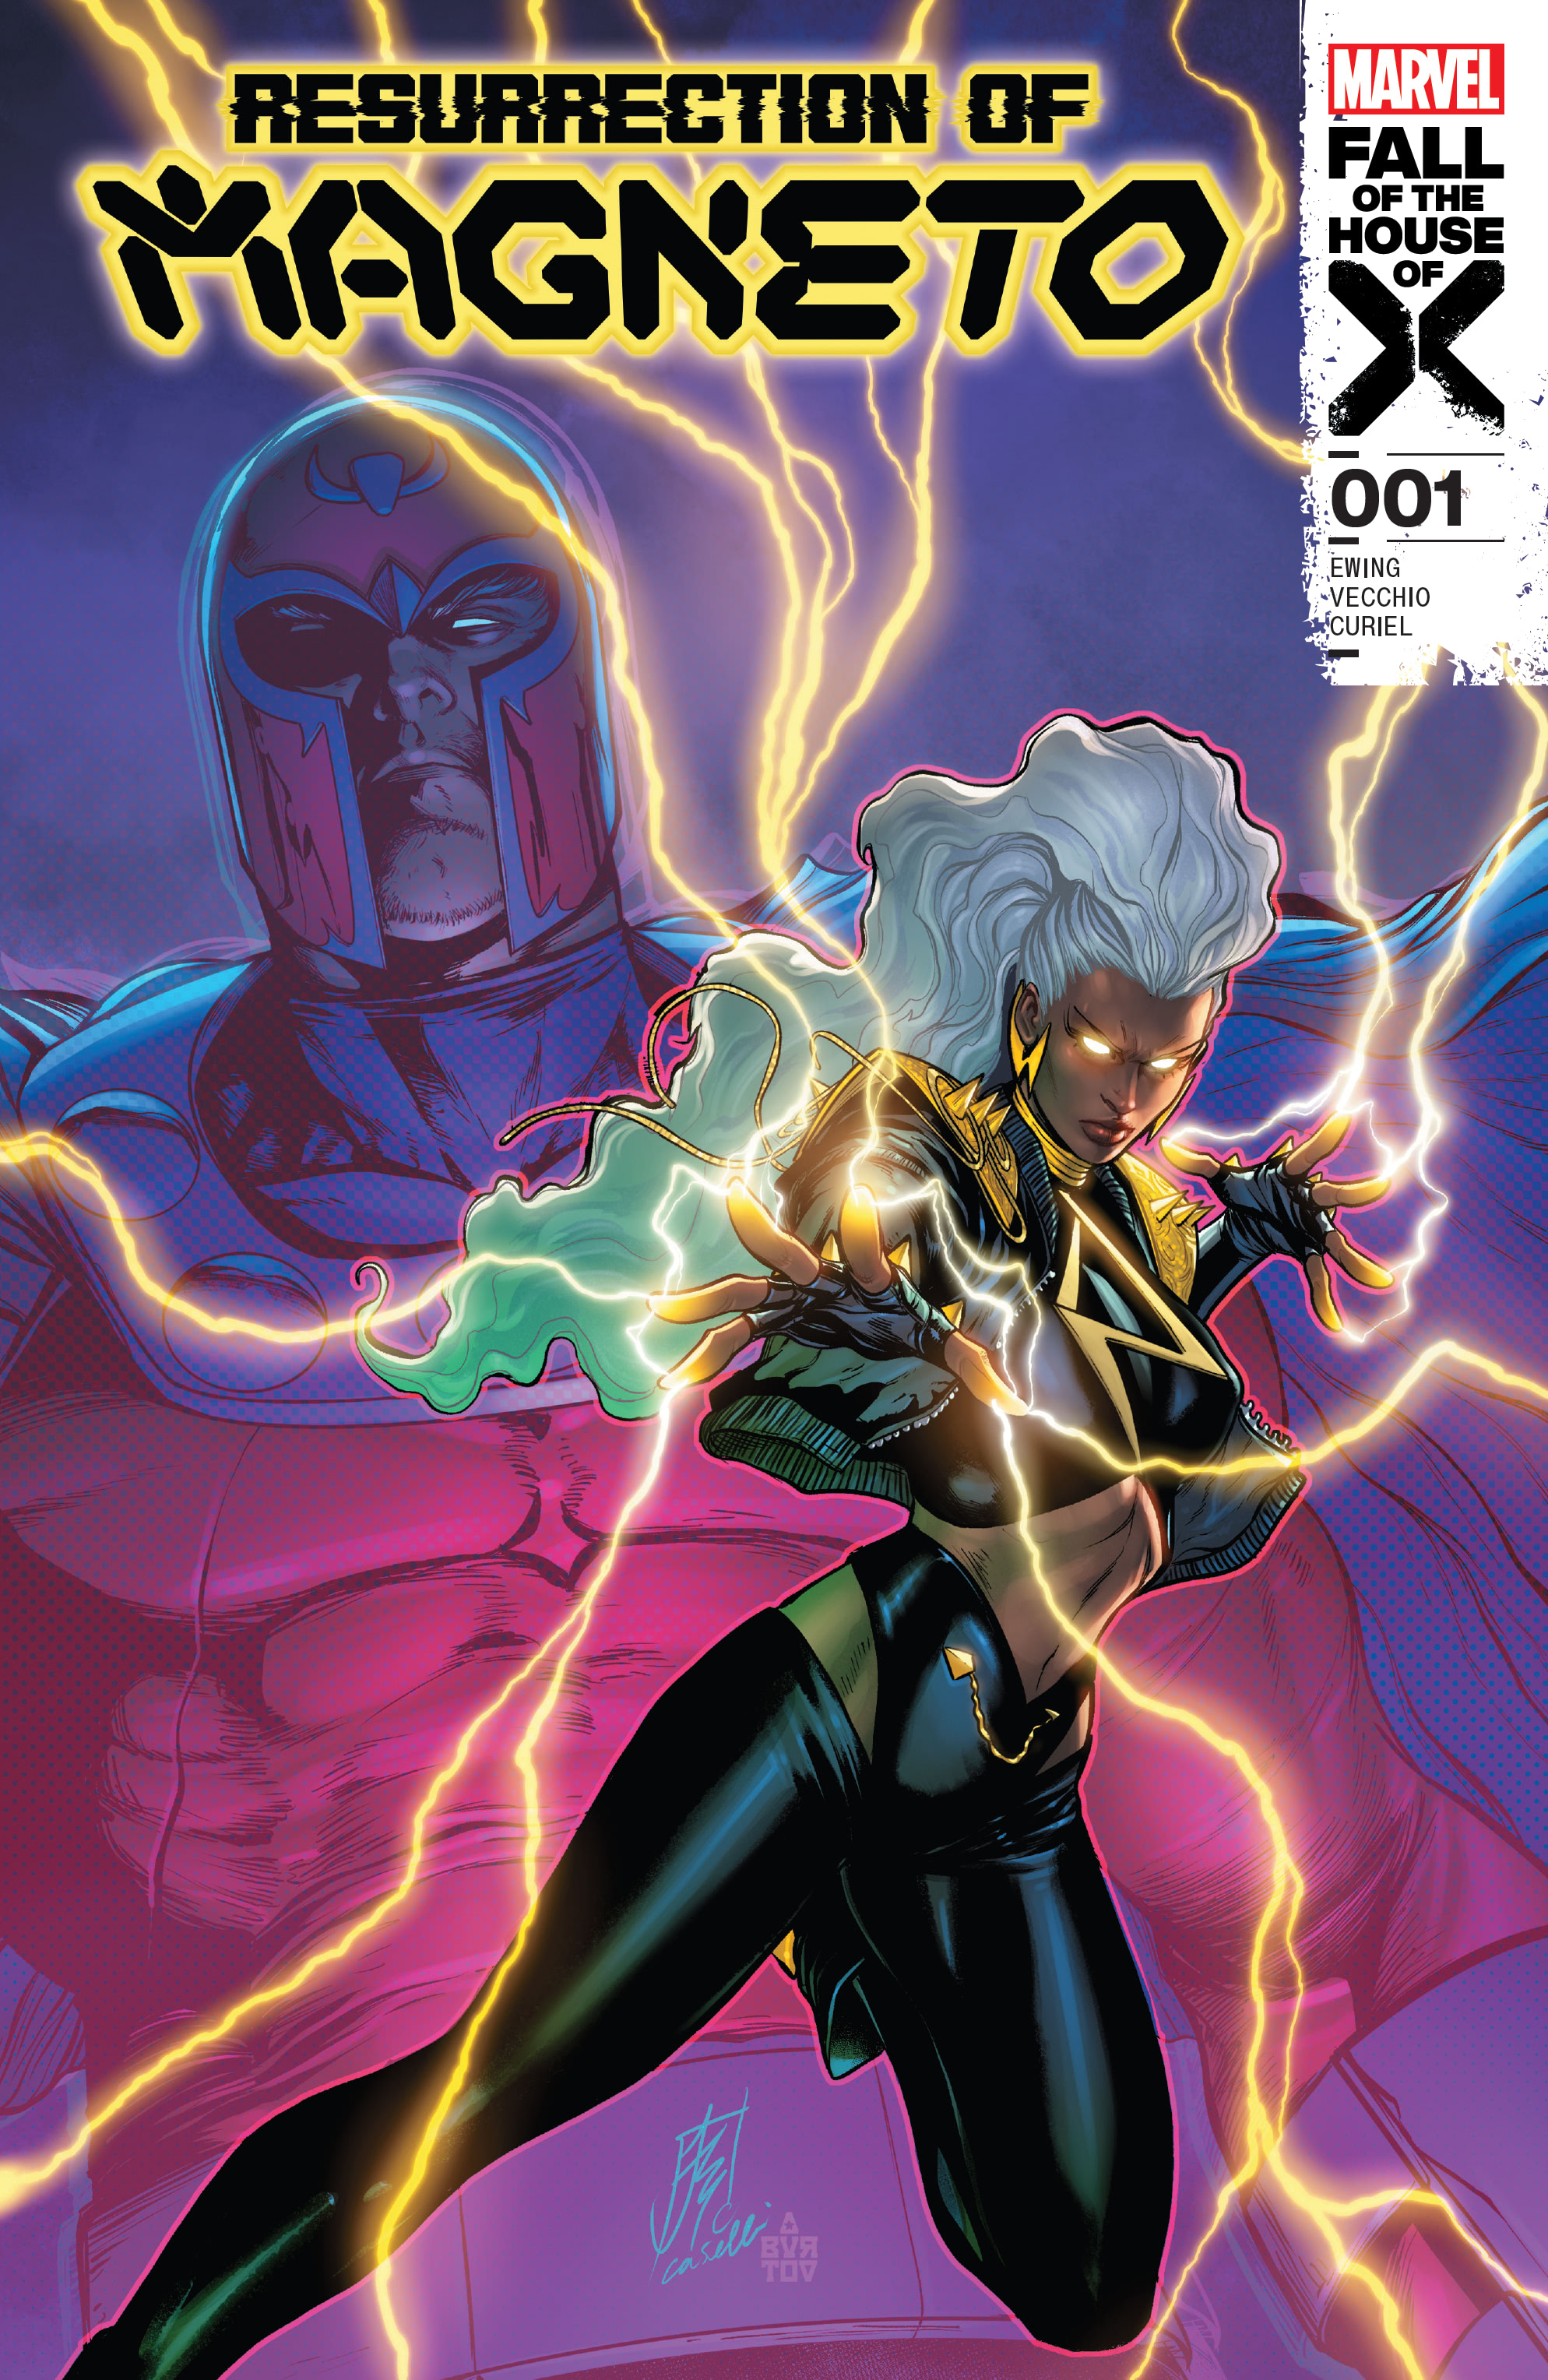 Read online Resurrection of Magneto comic -  Issue #1 - 1